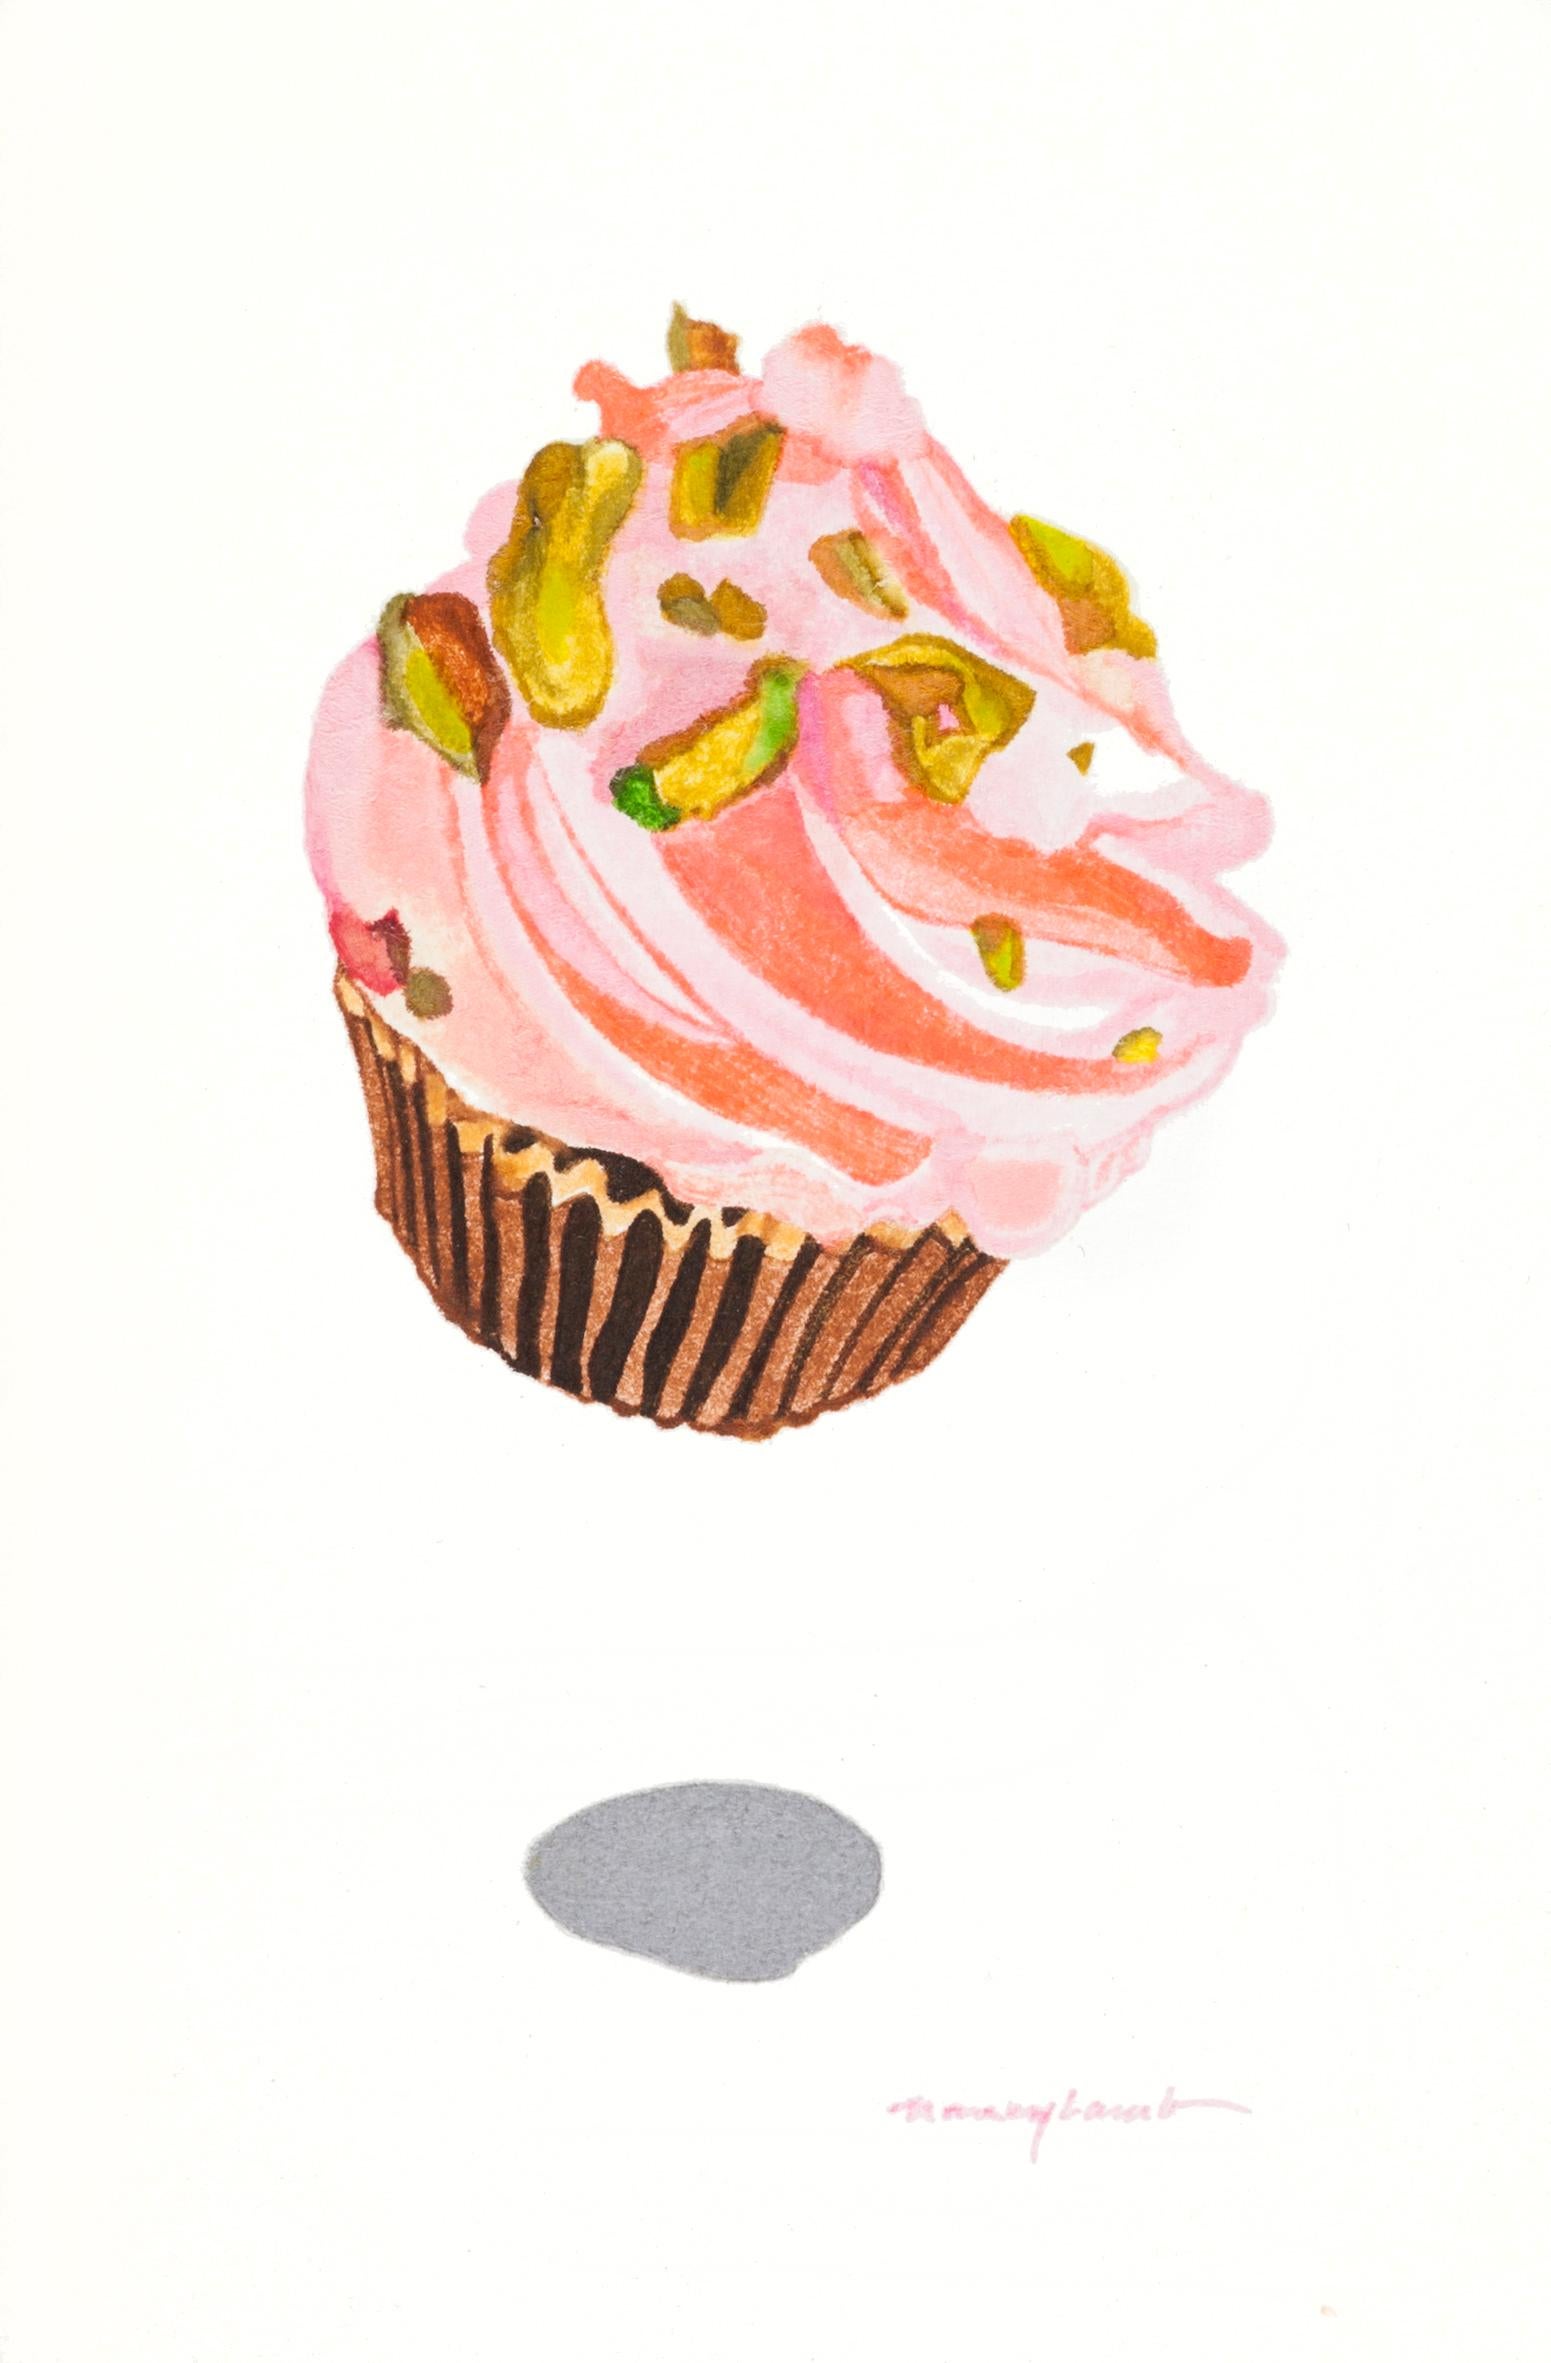 Nancy Lamb  Still-Life - Small Contemporary Dessert Watercolor of Pink Strawberry Cupcake with Pistachios